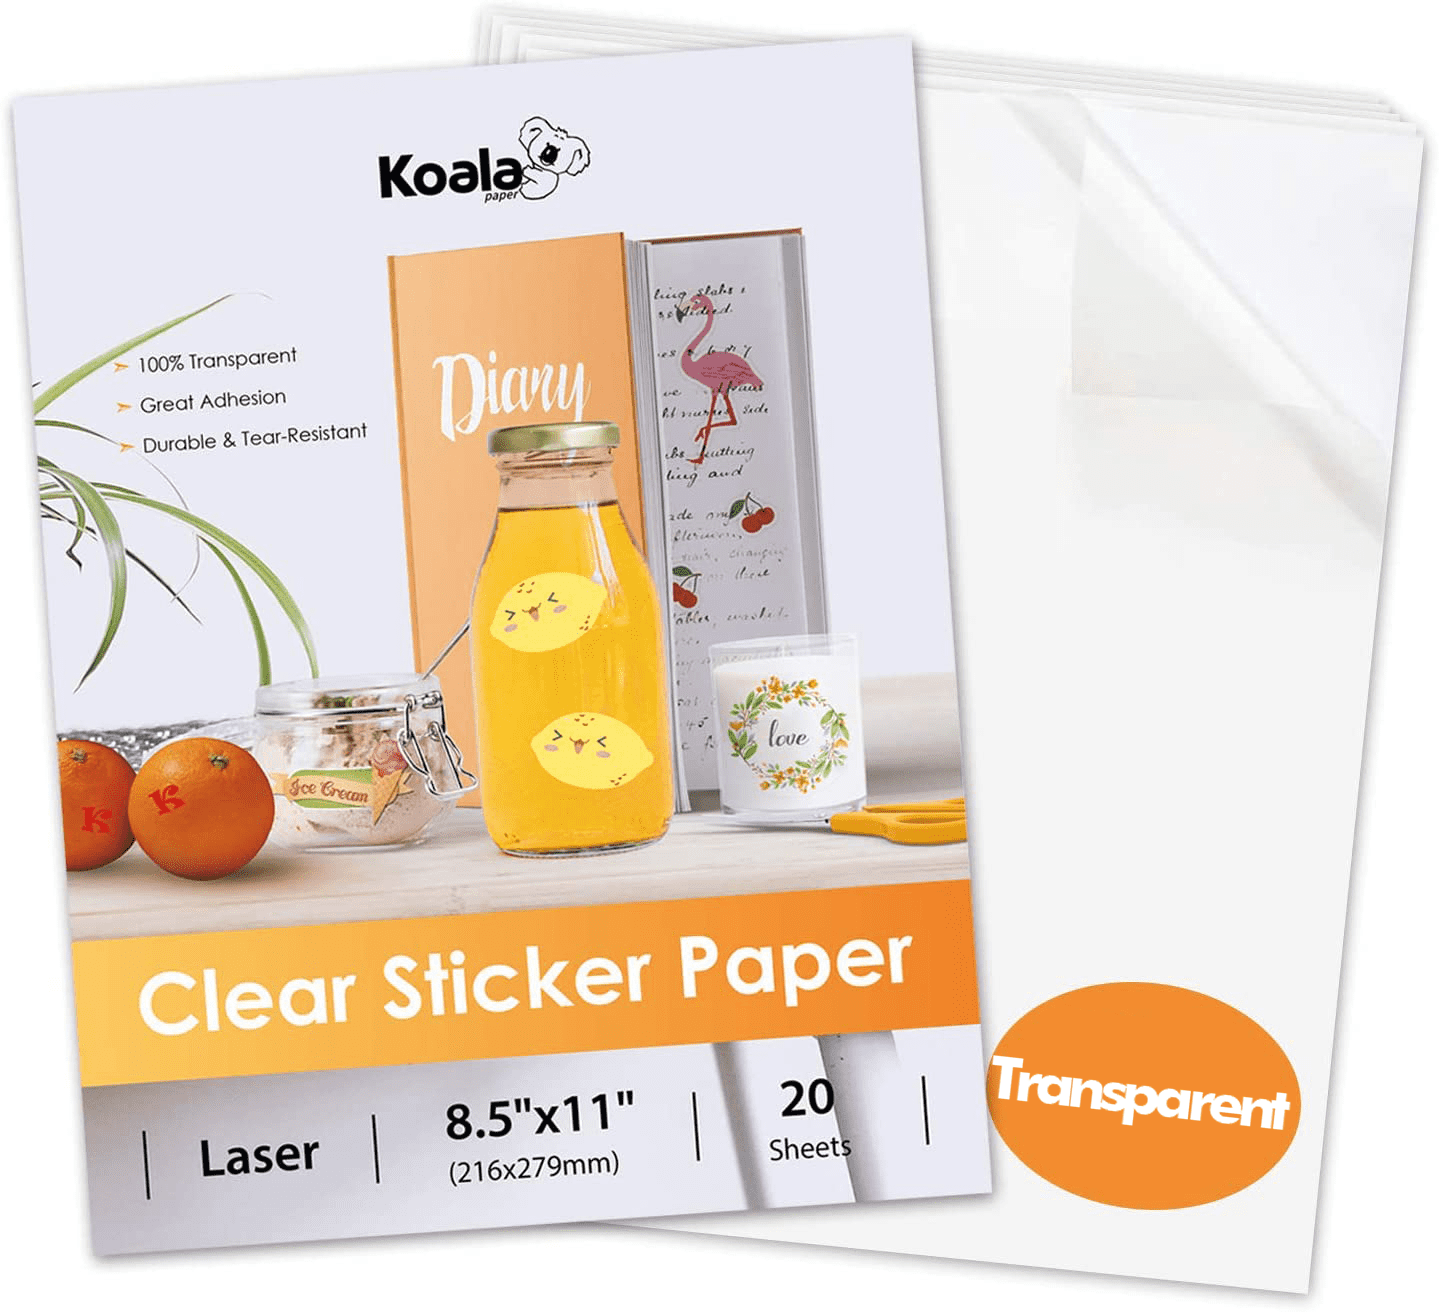 Printing on clear sticker paper - what's the secret? : r